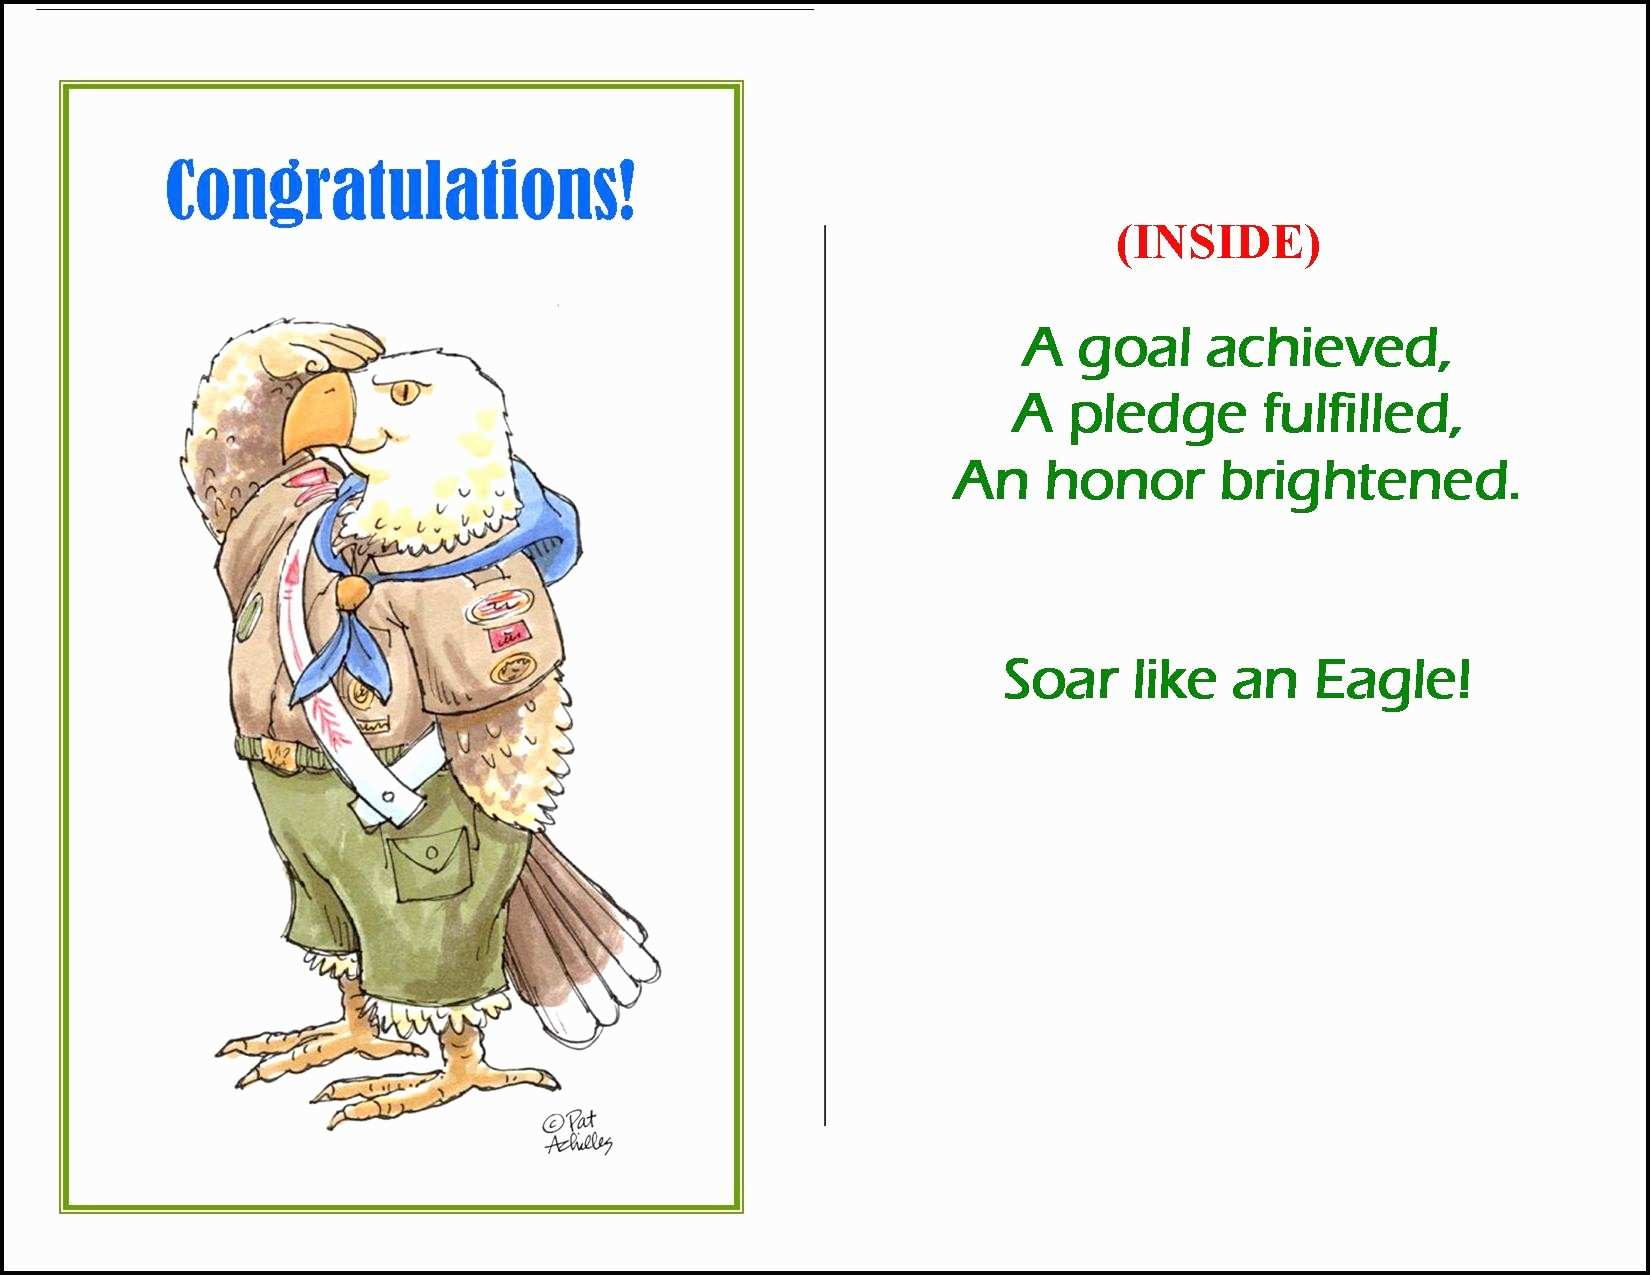 Eagle Scout Cards Free Printable Pleasant Printable Thank You Card - Eagle Scout Cards Free Printable